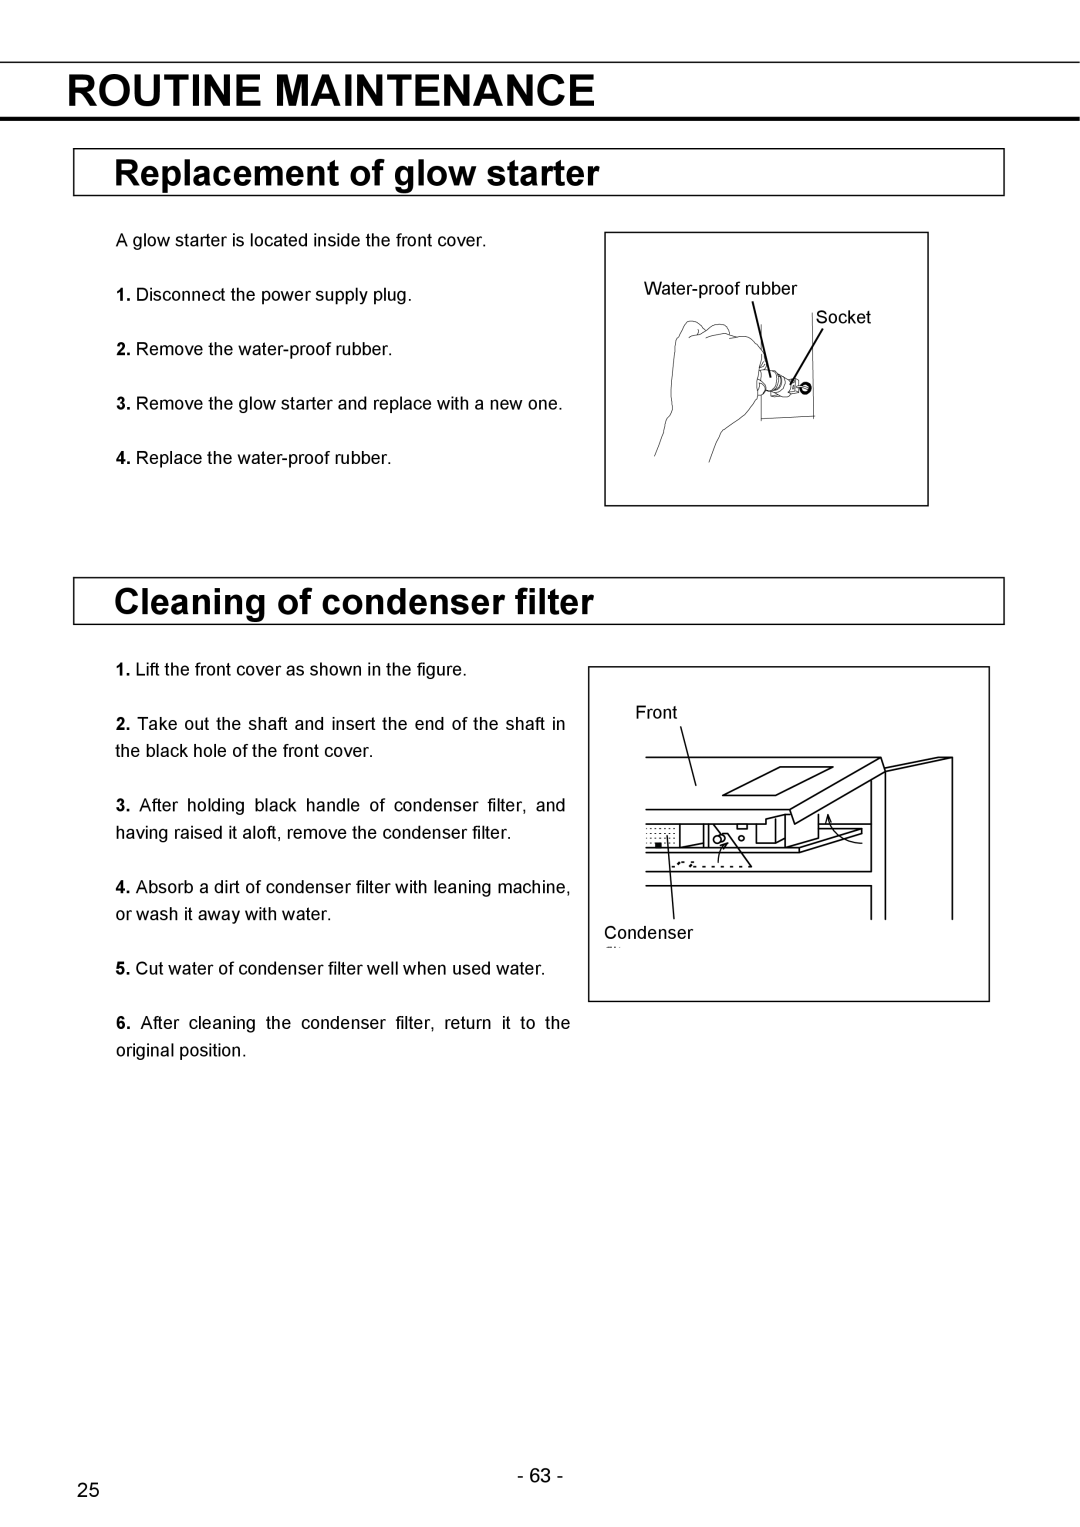 Sanyo MPR-1411R instruction manual Replacement of glow starter, Cleaning of condenser filter, Routine Maintenance 